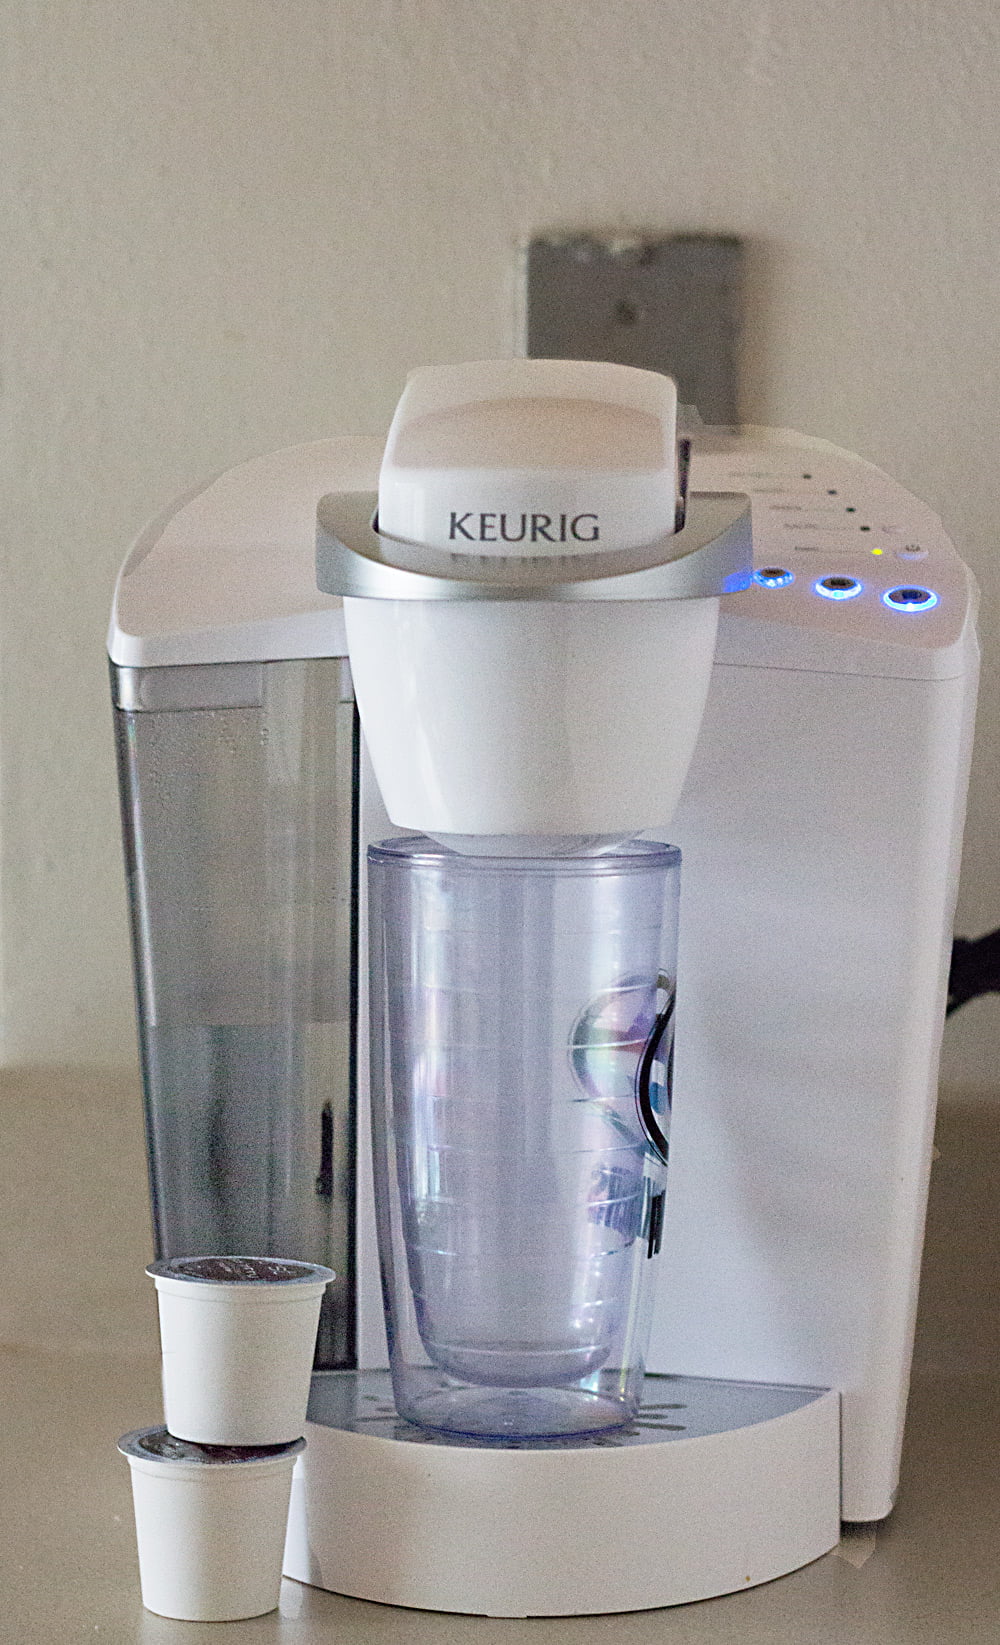 https://www.itsyummi.com/wp-content/uploads/2014/06/how-to-brew-iced-coffee-with-a-Keurig-brewing-machine-BrewItUp-BrewOverIce-shop.jpg